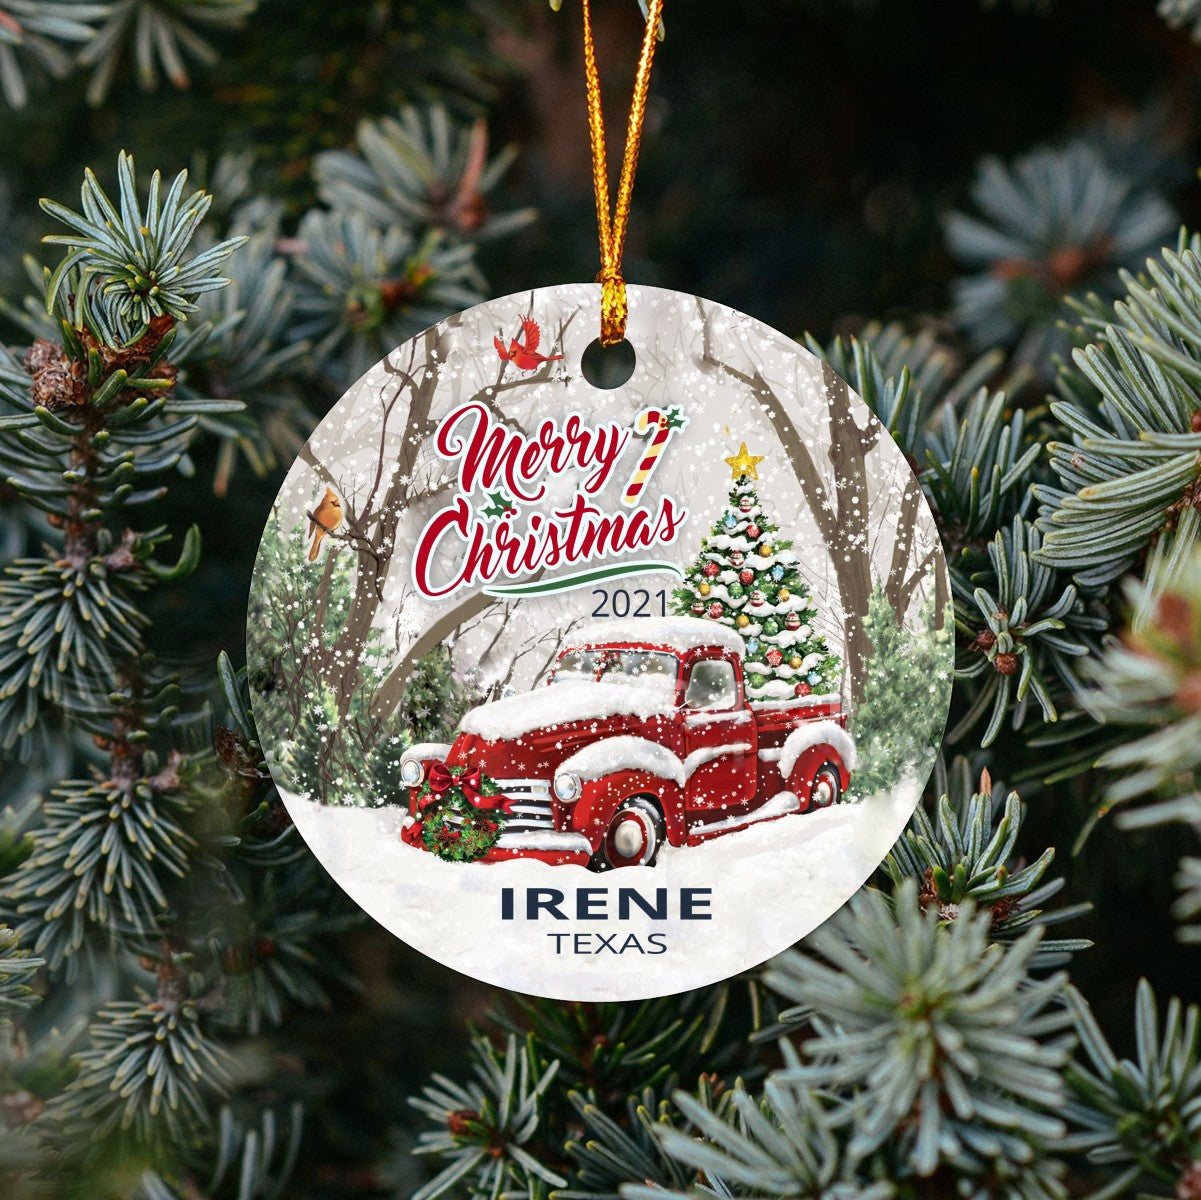 Christmas Tree Ornaments Irene - Ornament With Name City, State Irene Texas TX Ornament - Red Truck Xmas Ornaments 3'' Plastic Gift For Family, Friend And Housewarming